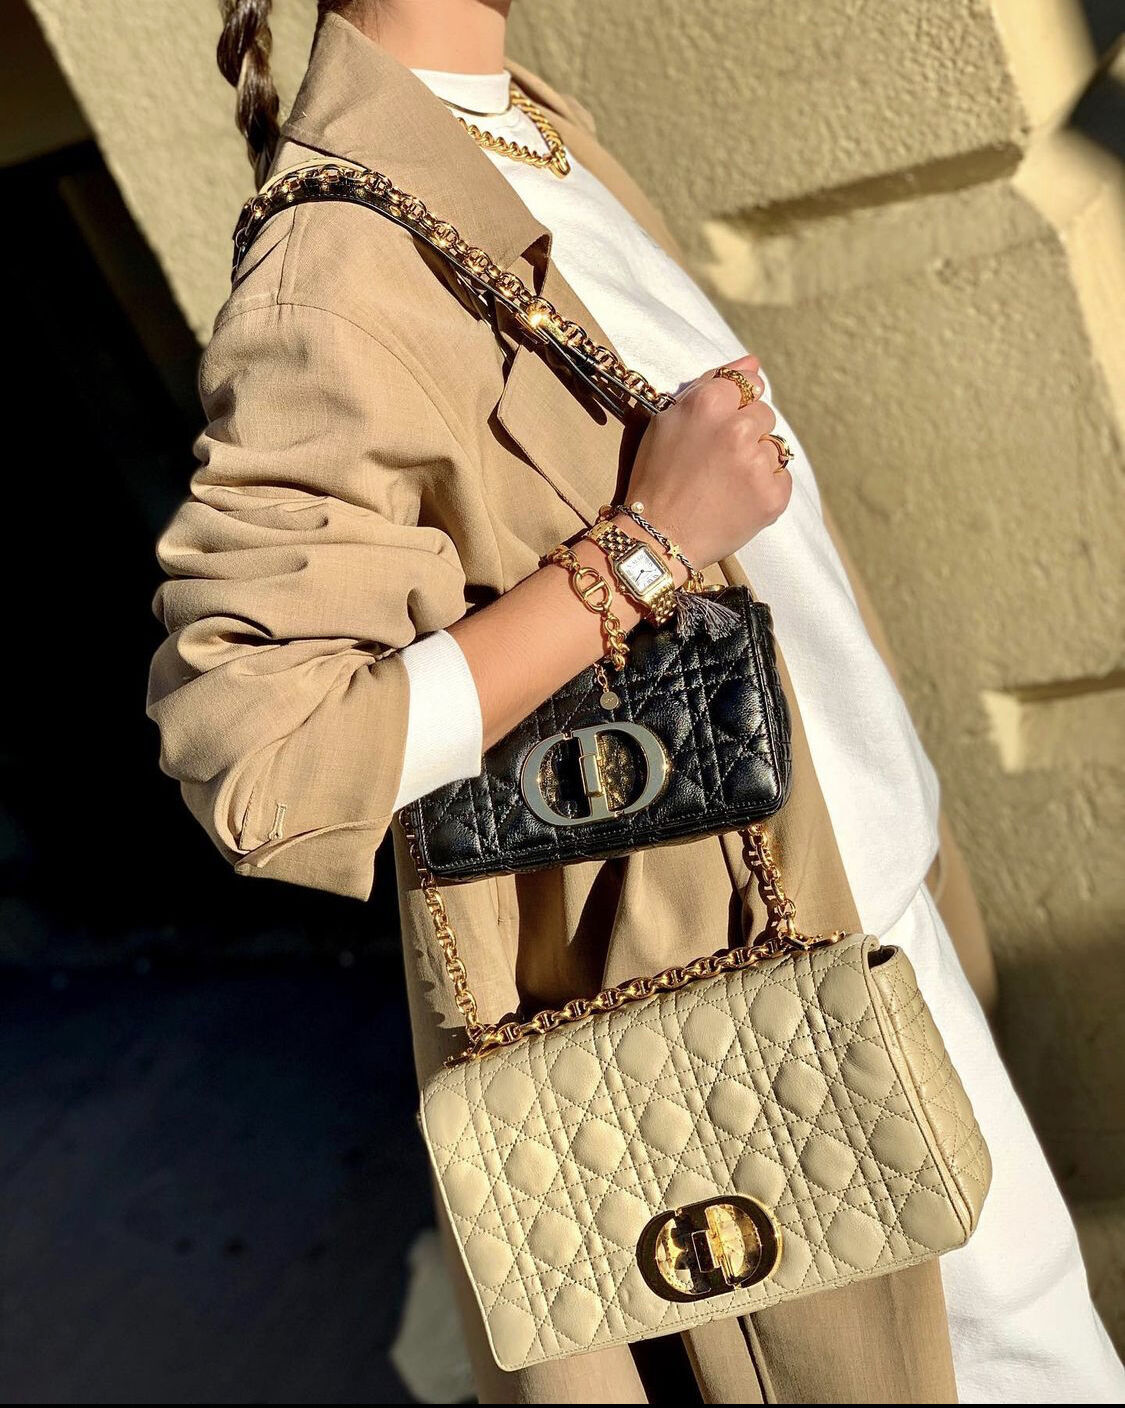 dior caro bag in beige and black with jaclyn bloomfield